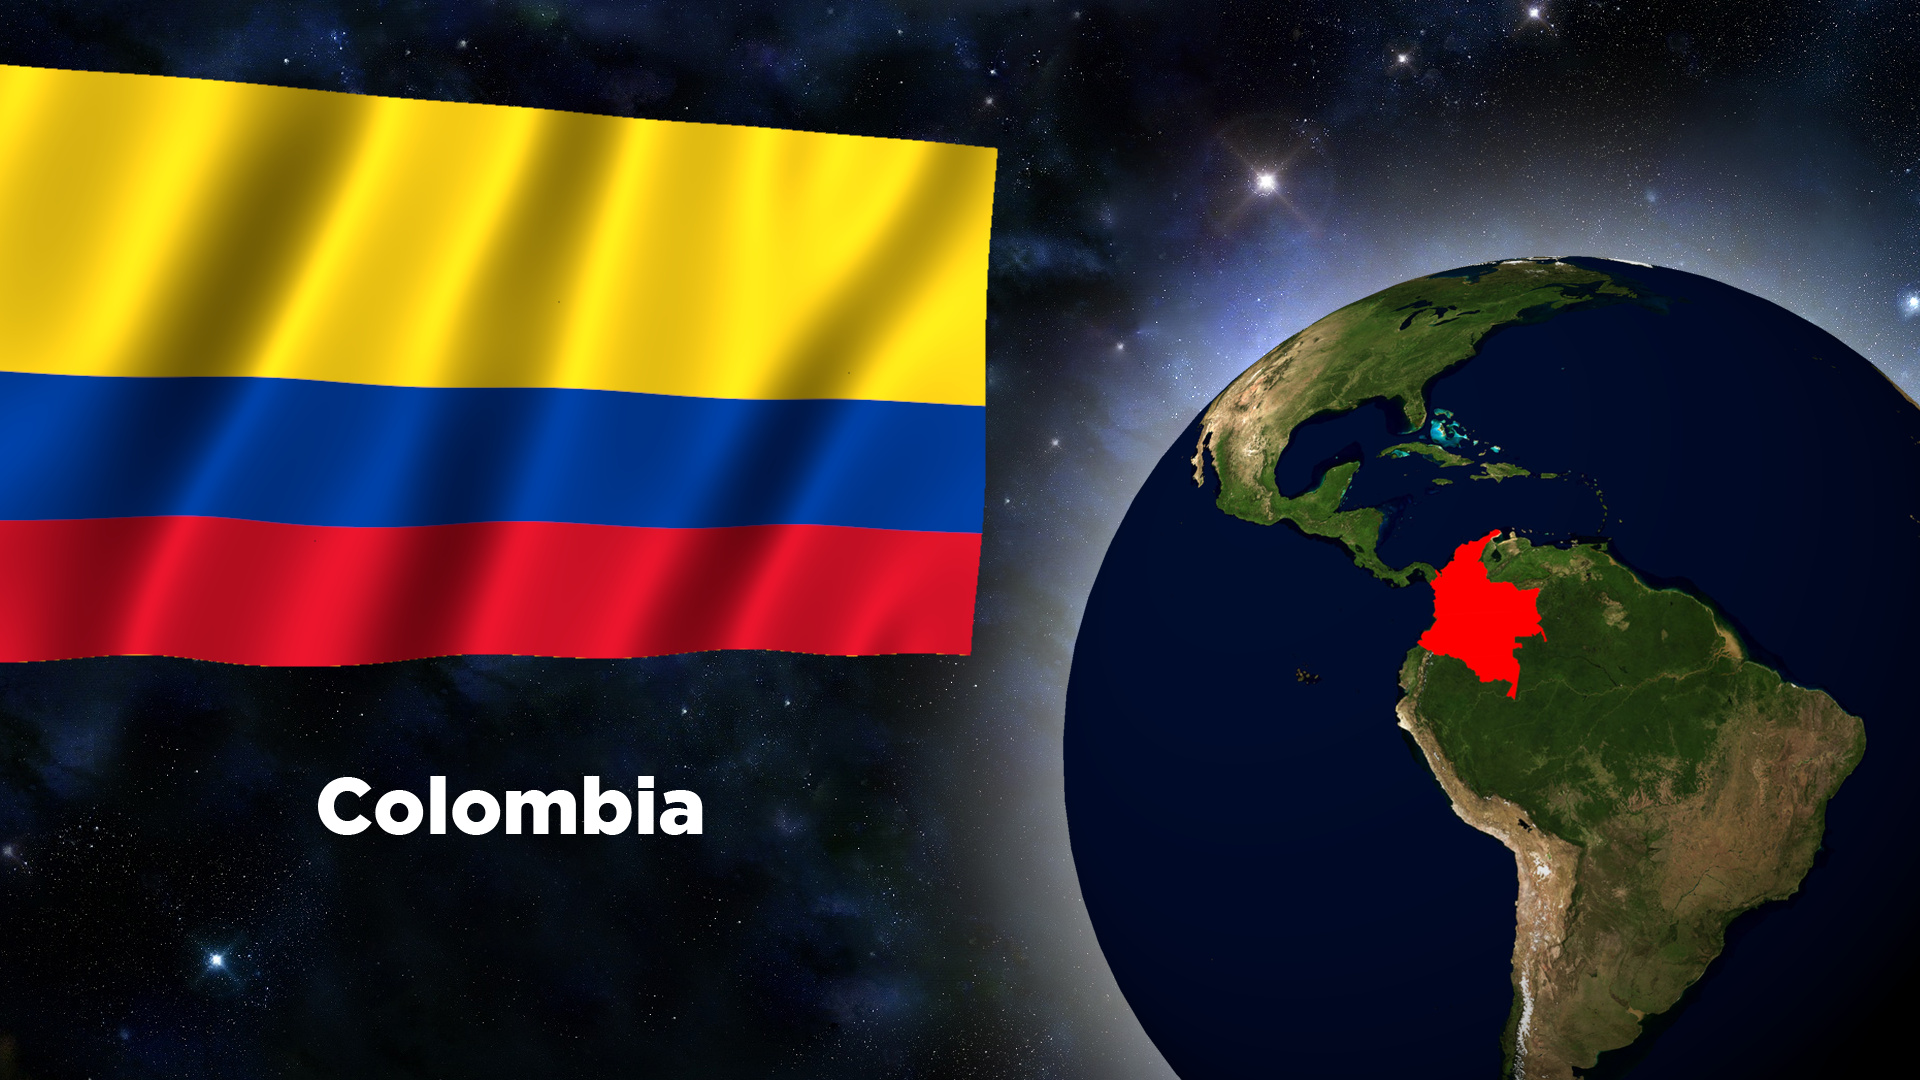 Flag Wallpaper - Colombia by darellnonis on DeviantArt